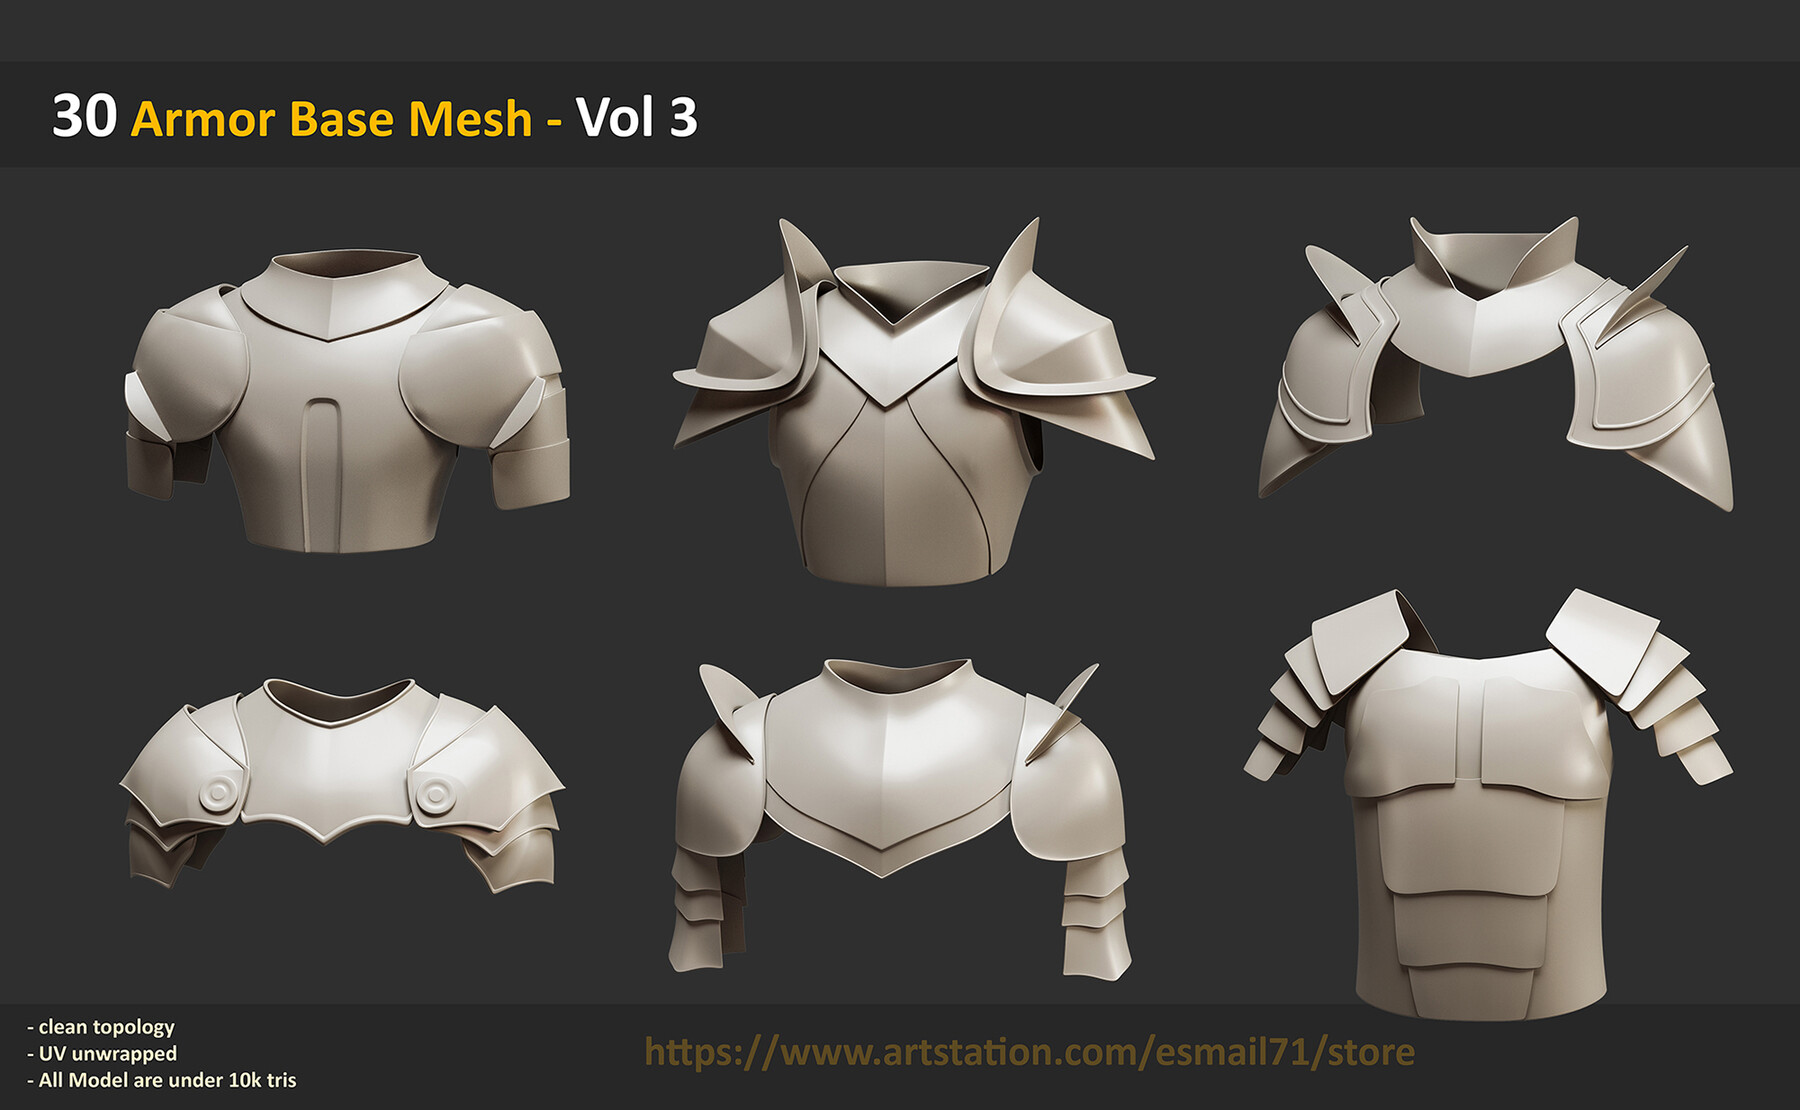 ArtStation - 15 High Quality Armor Leather Material